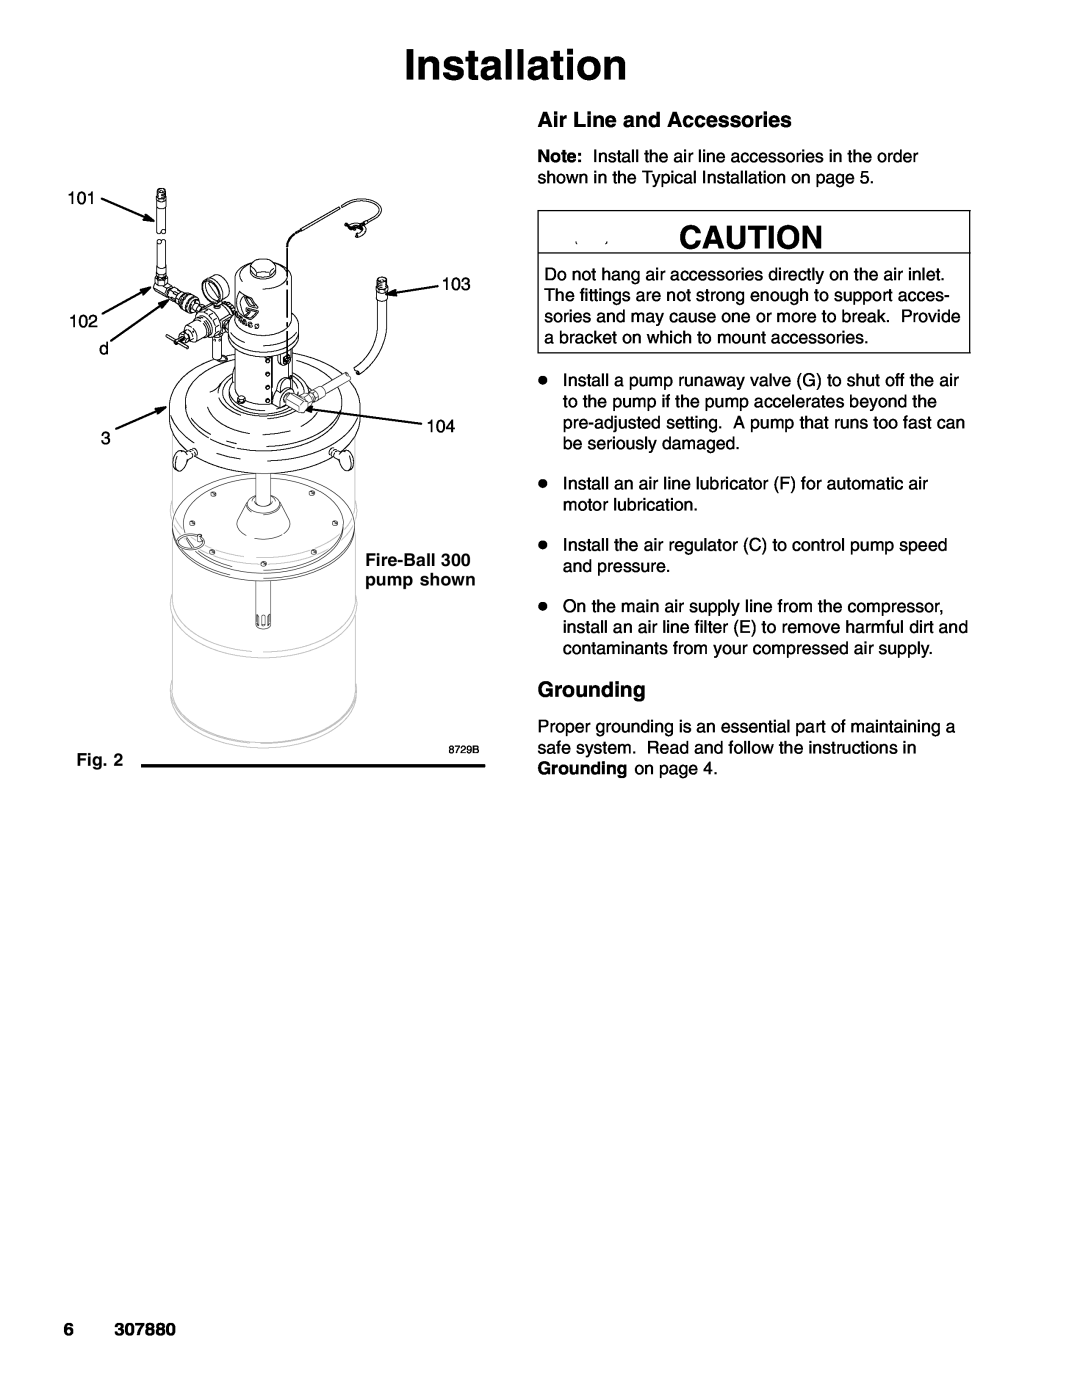 Graco 425 important safety instructions Air Line and Accessories, Installation, Grounding, Fire-Ball300 pump shown 